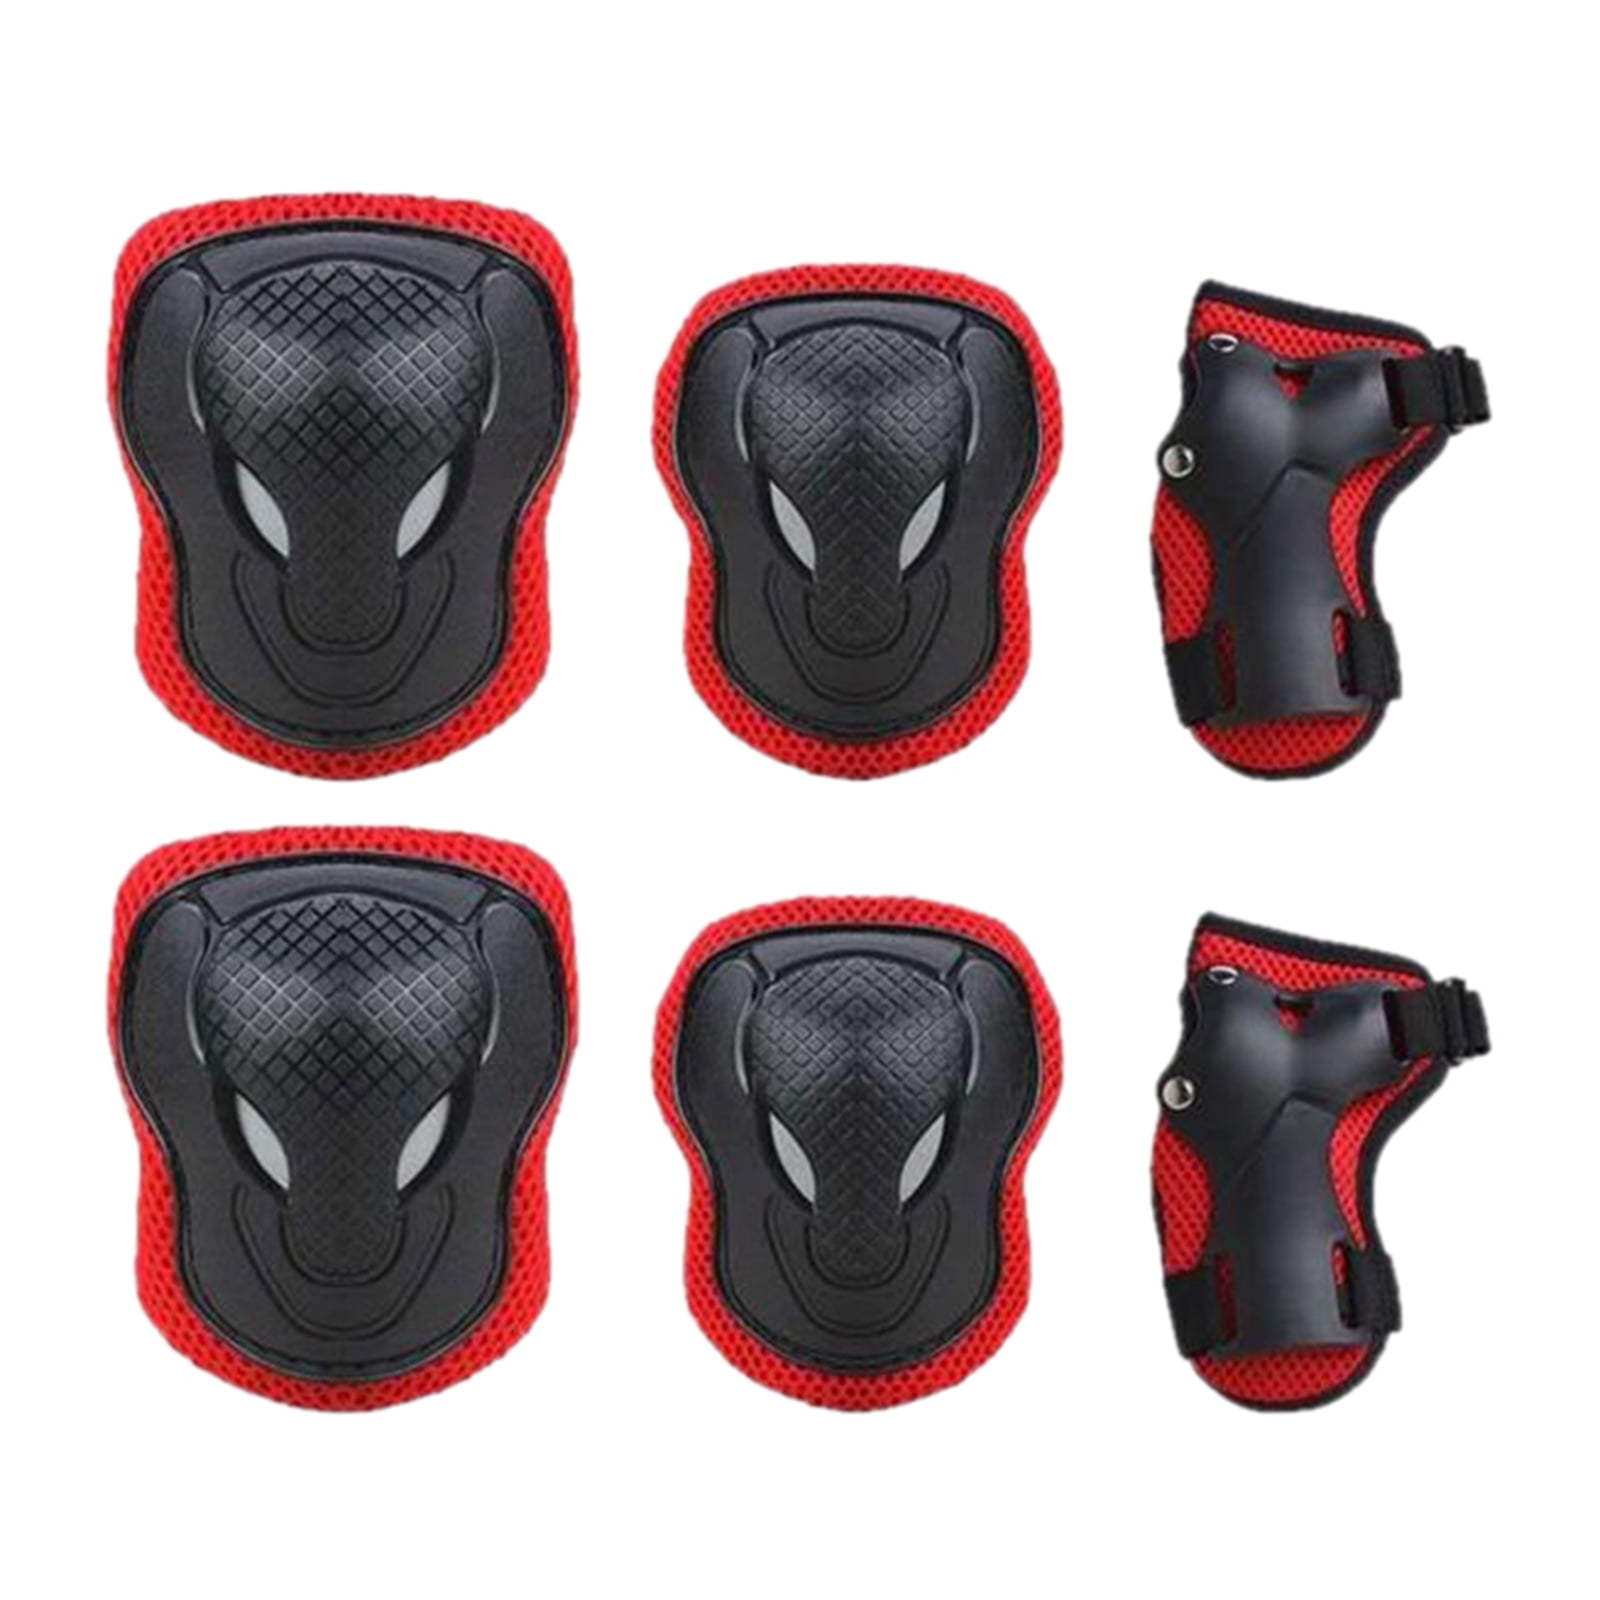 6Pcs Protective Gear Set Elbow Knee Palm Pads for Kids Skateboarding Cycling 